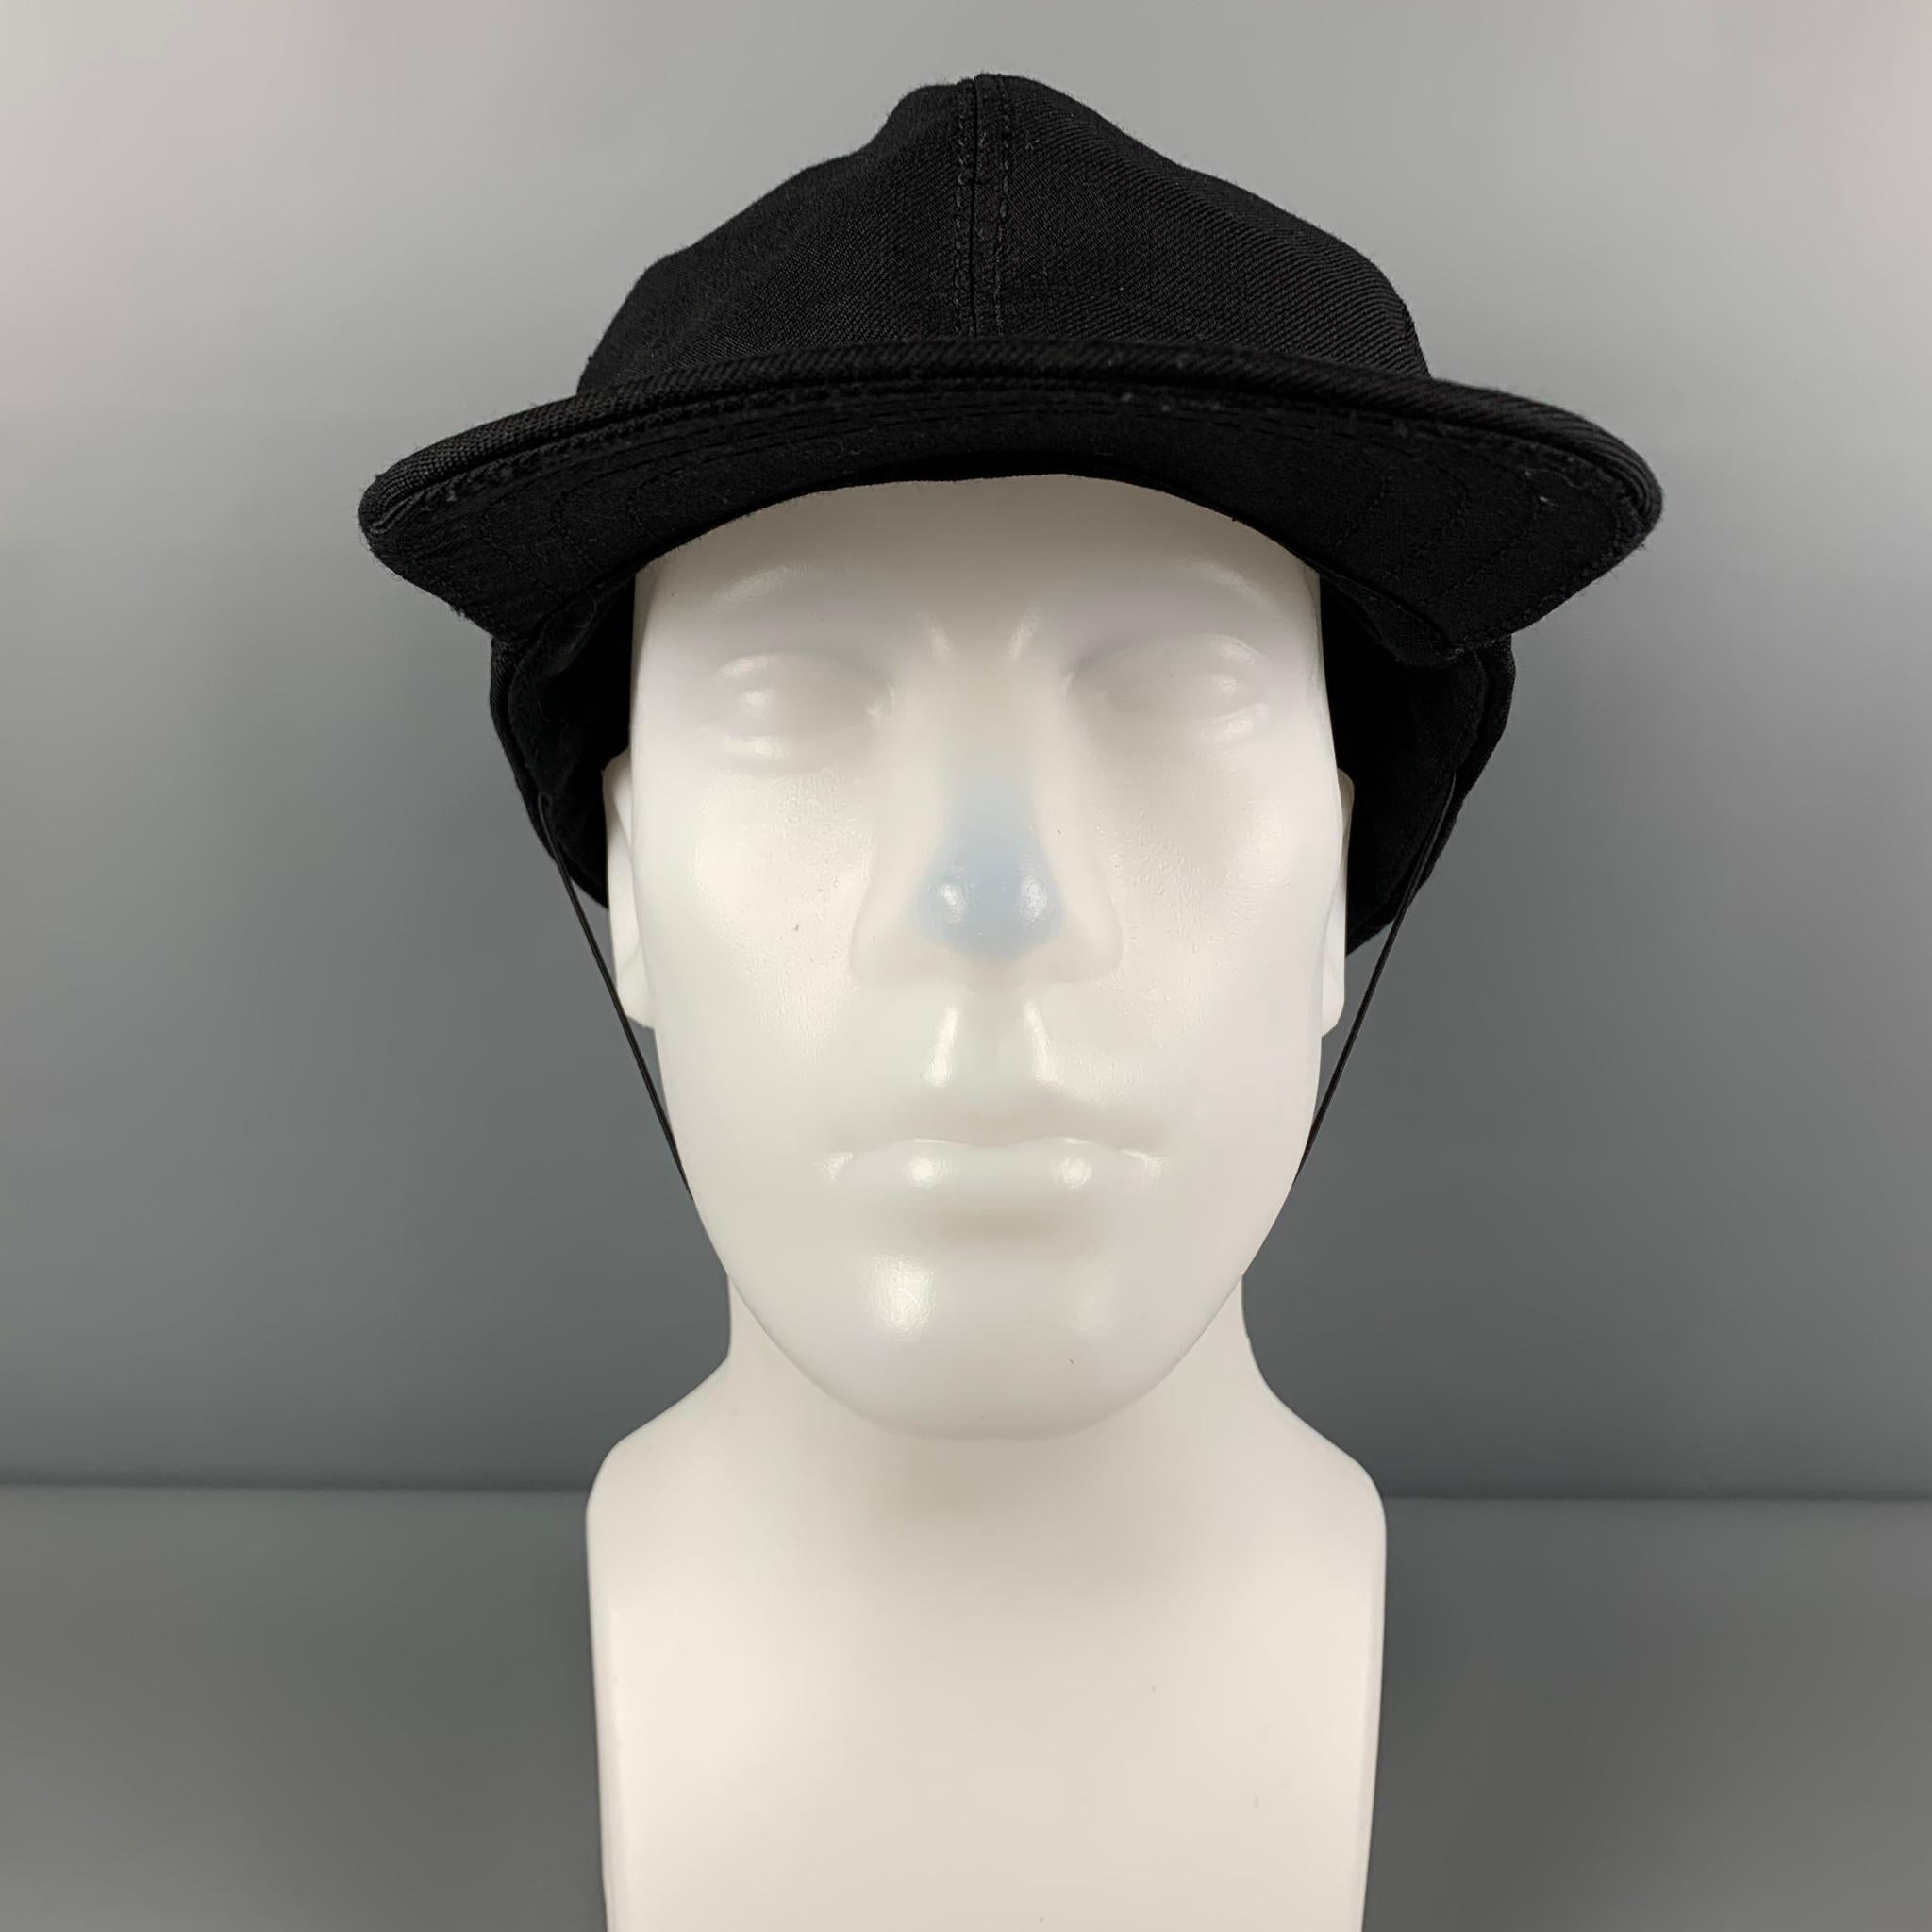 STEPHEN JONES for MARC JACOBS hat comes in a black wool featuring a baseball style, front brim, and a elastic strap. 

New with tags. 
Marked: M/L

Measurements:

Opening: 24 in.
Brim: 3.5 in.
Height: 7 in.